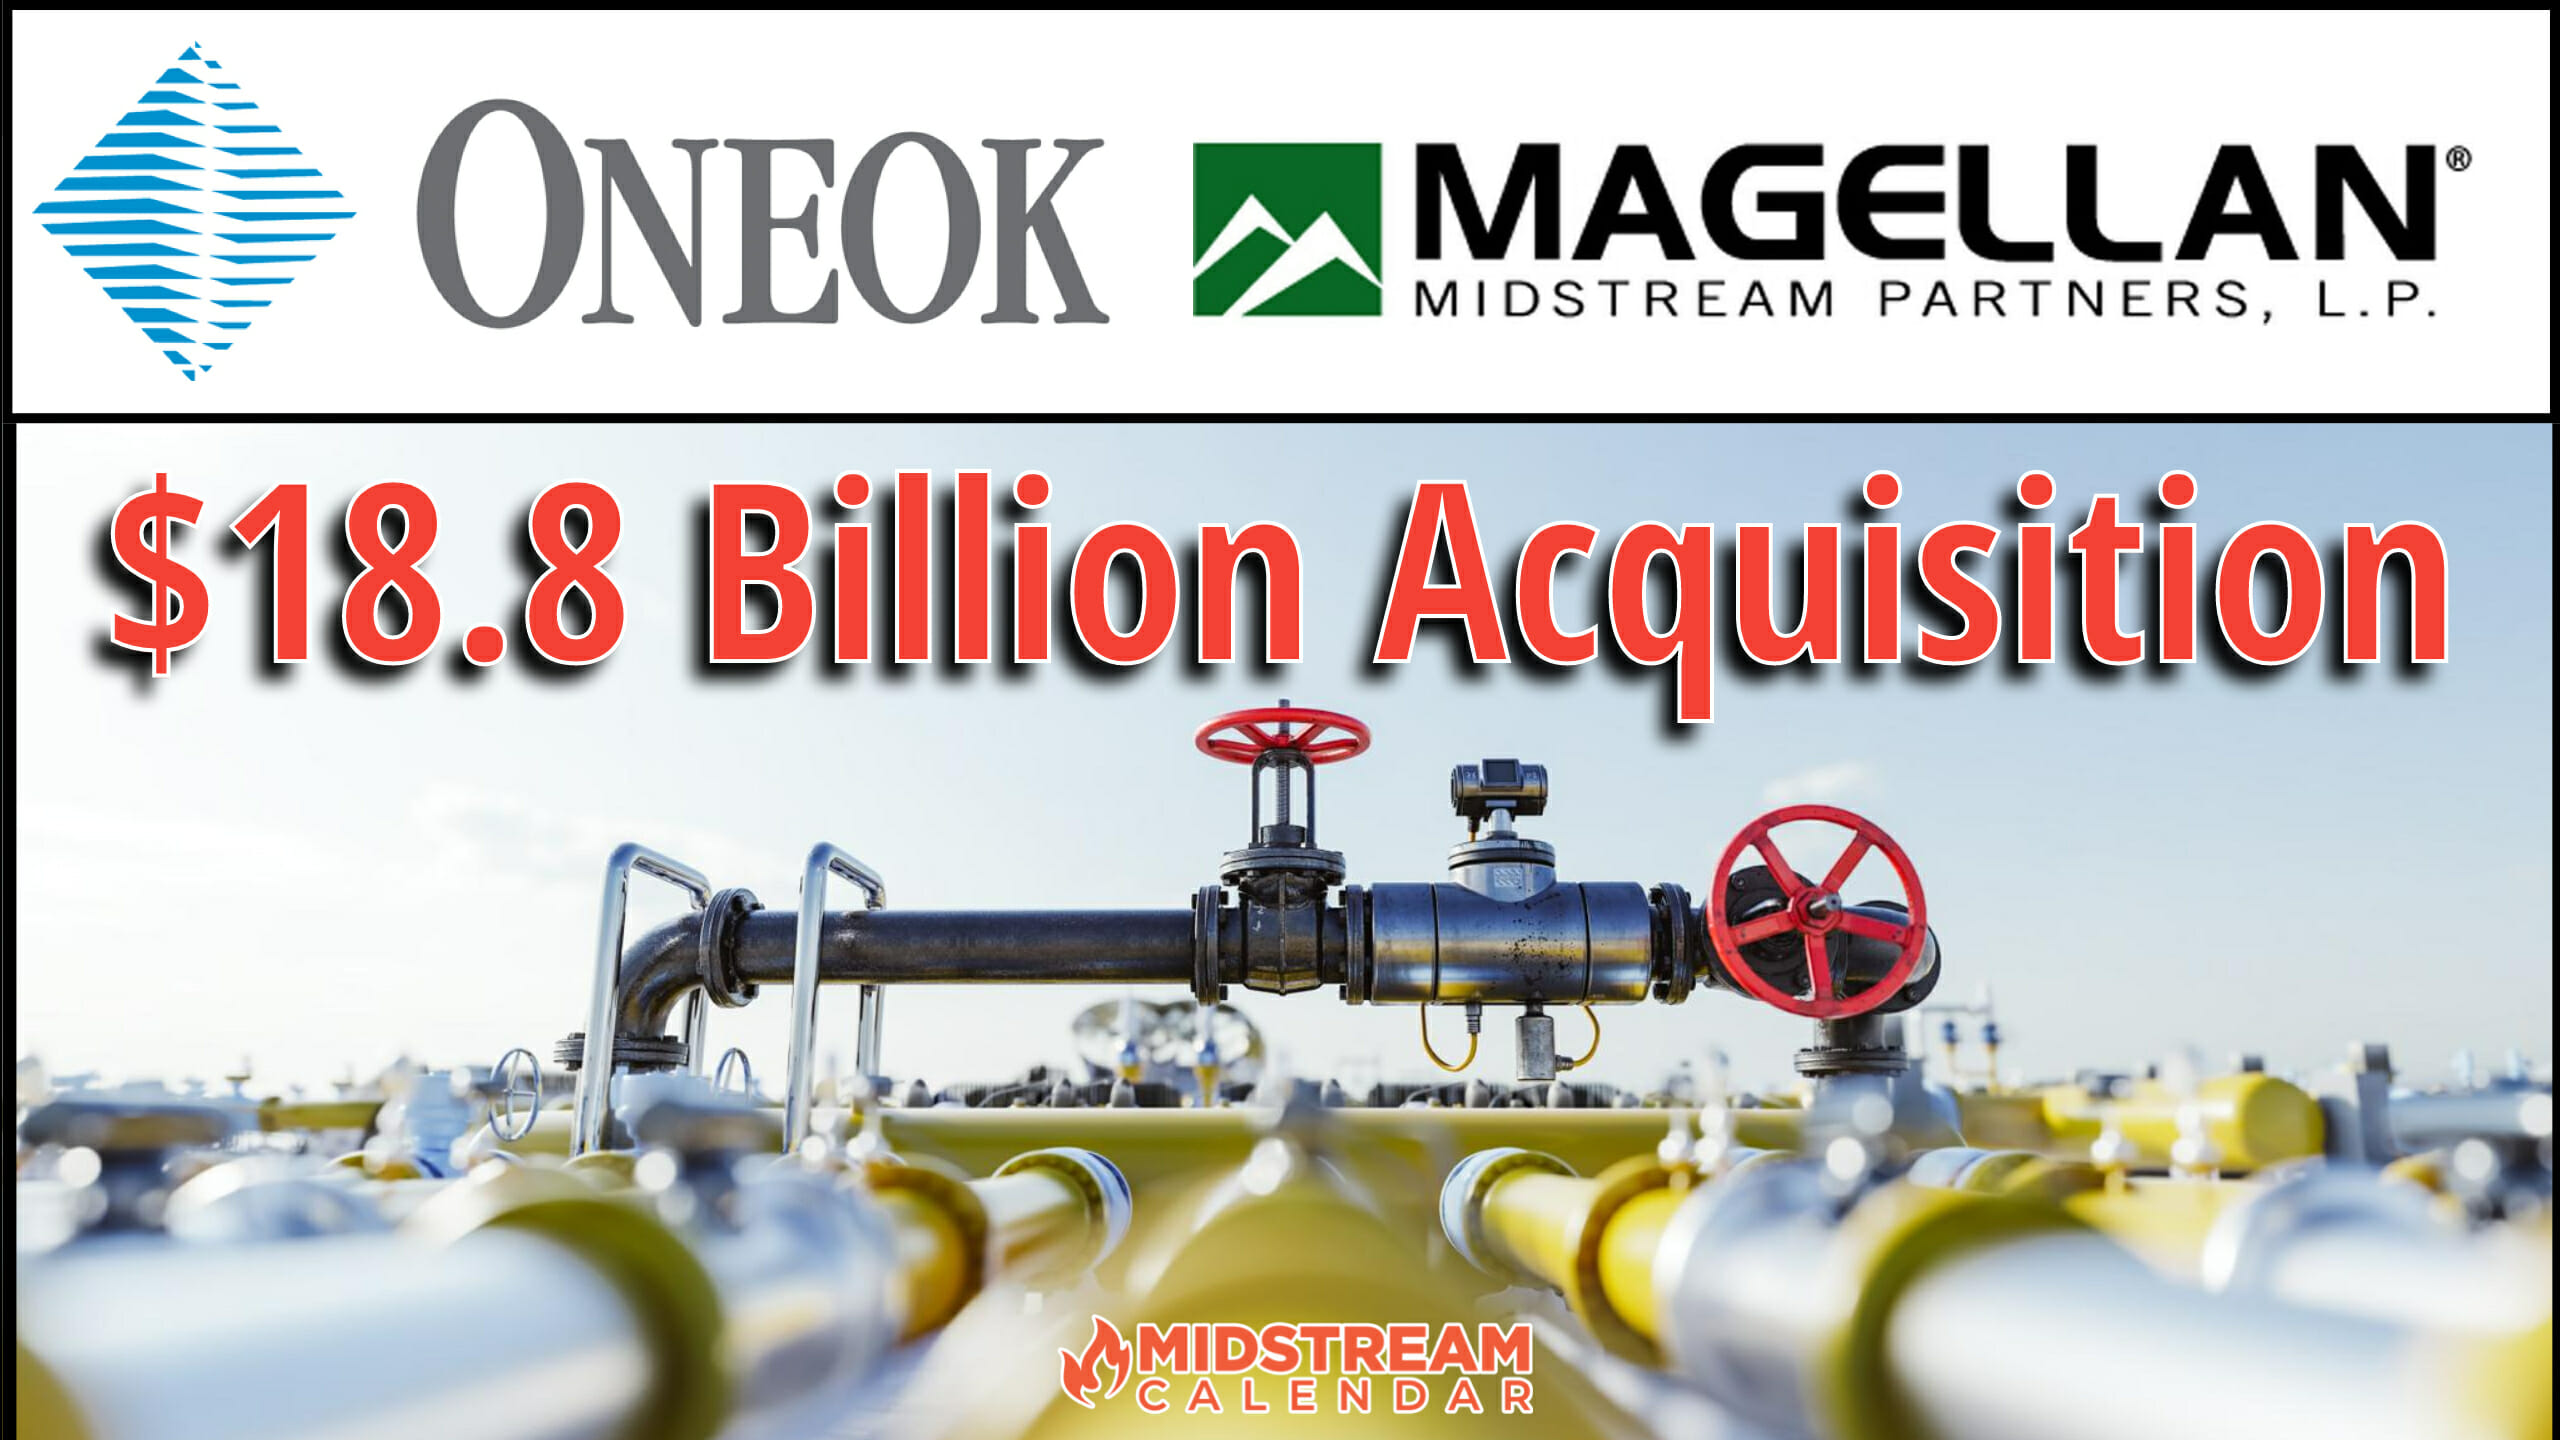 BREAKING NEWS: $18.8 Billion Acquisition : May 14th - ONEOK to Acquire Magellan  Midstream Partners in a Transaction Valued at $18.8 Billion - Midstream  Calendar